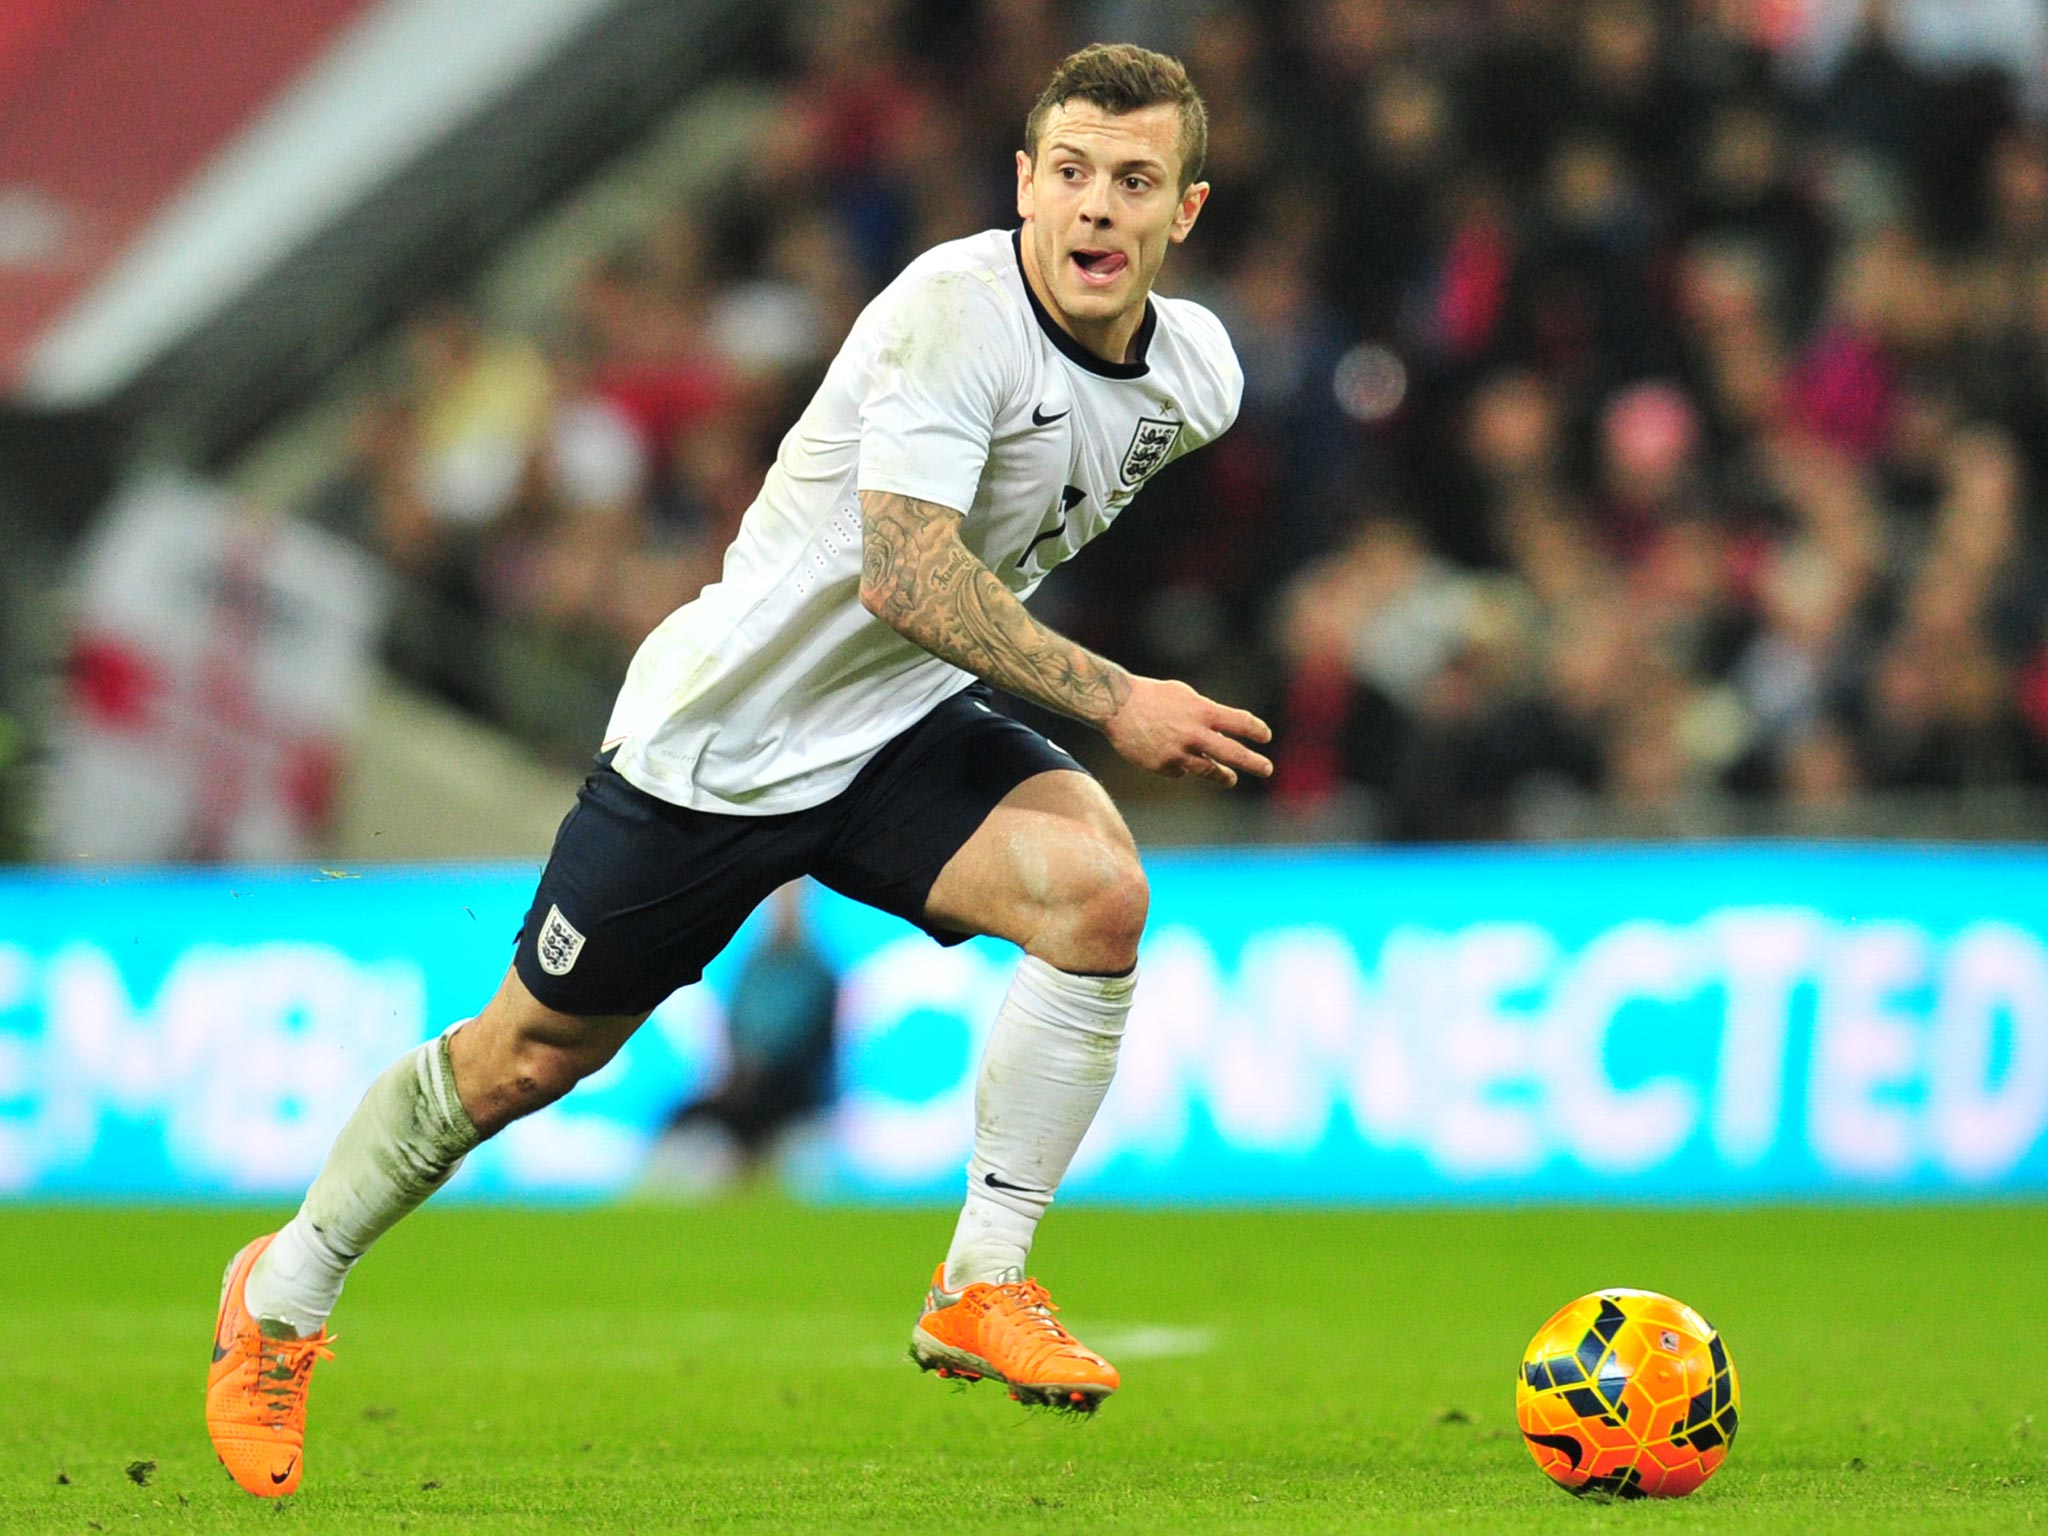 Jack Wilshere believes the next two months will be crucial in determining who makes the England squad for the World Cup